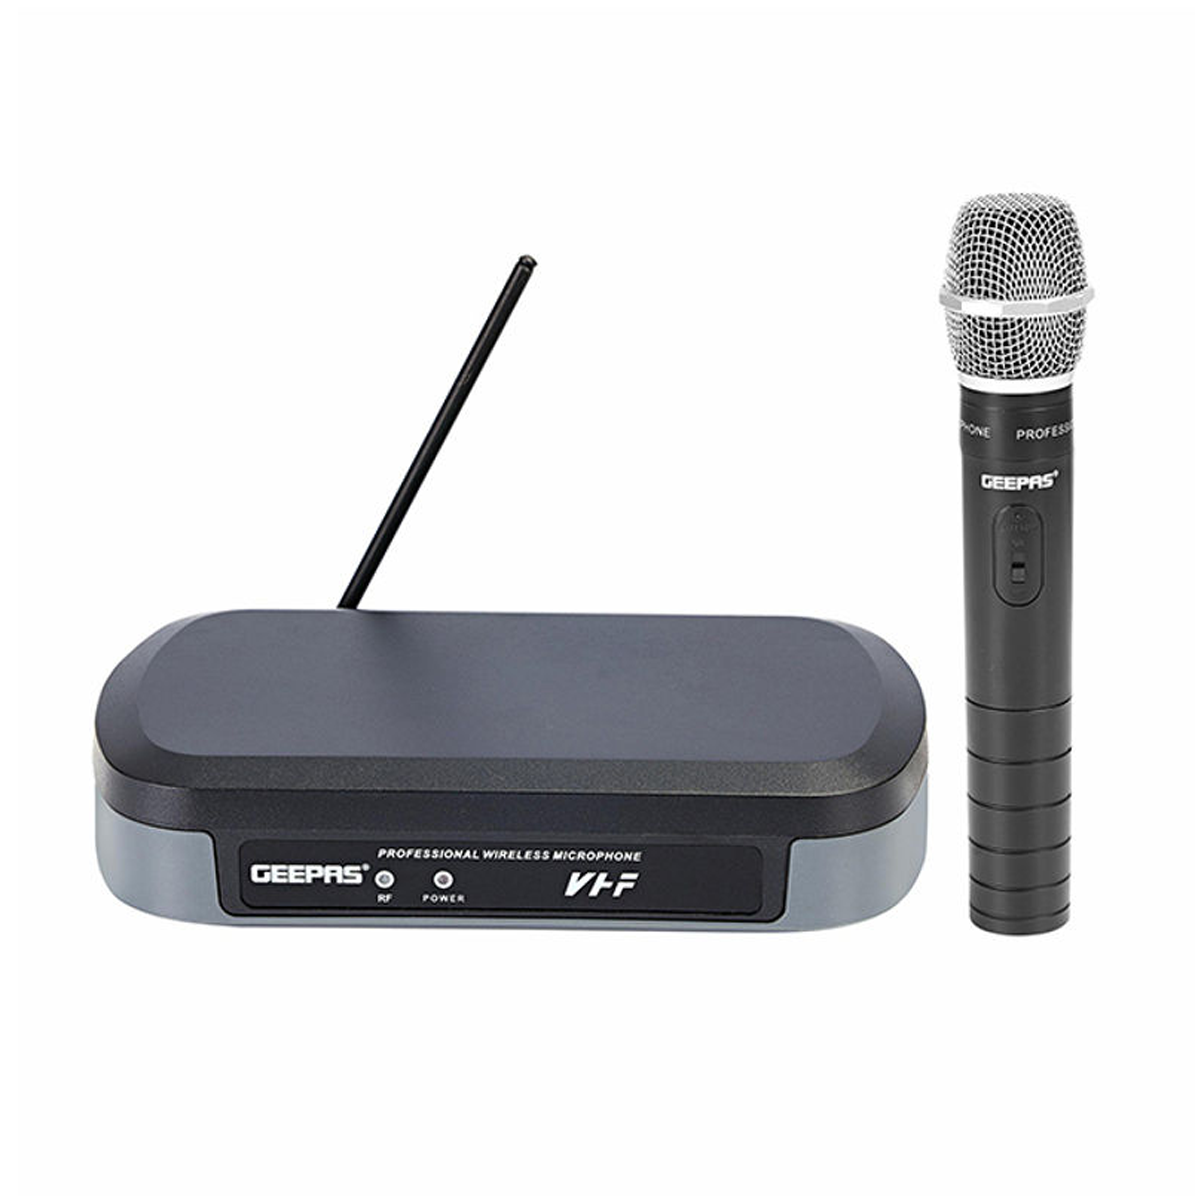 Geepas Professional Wireless Microphone GMP15011 Black